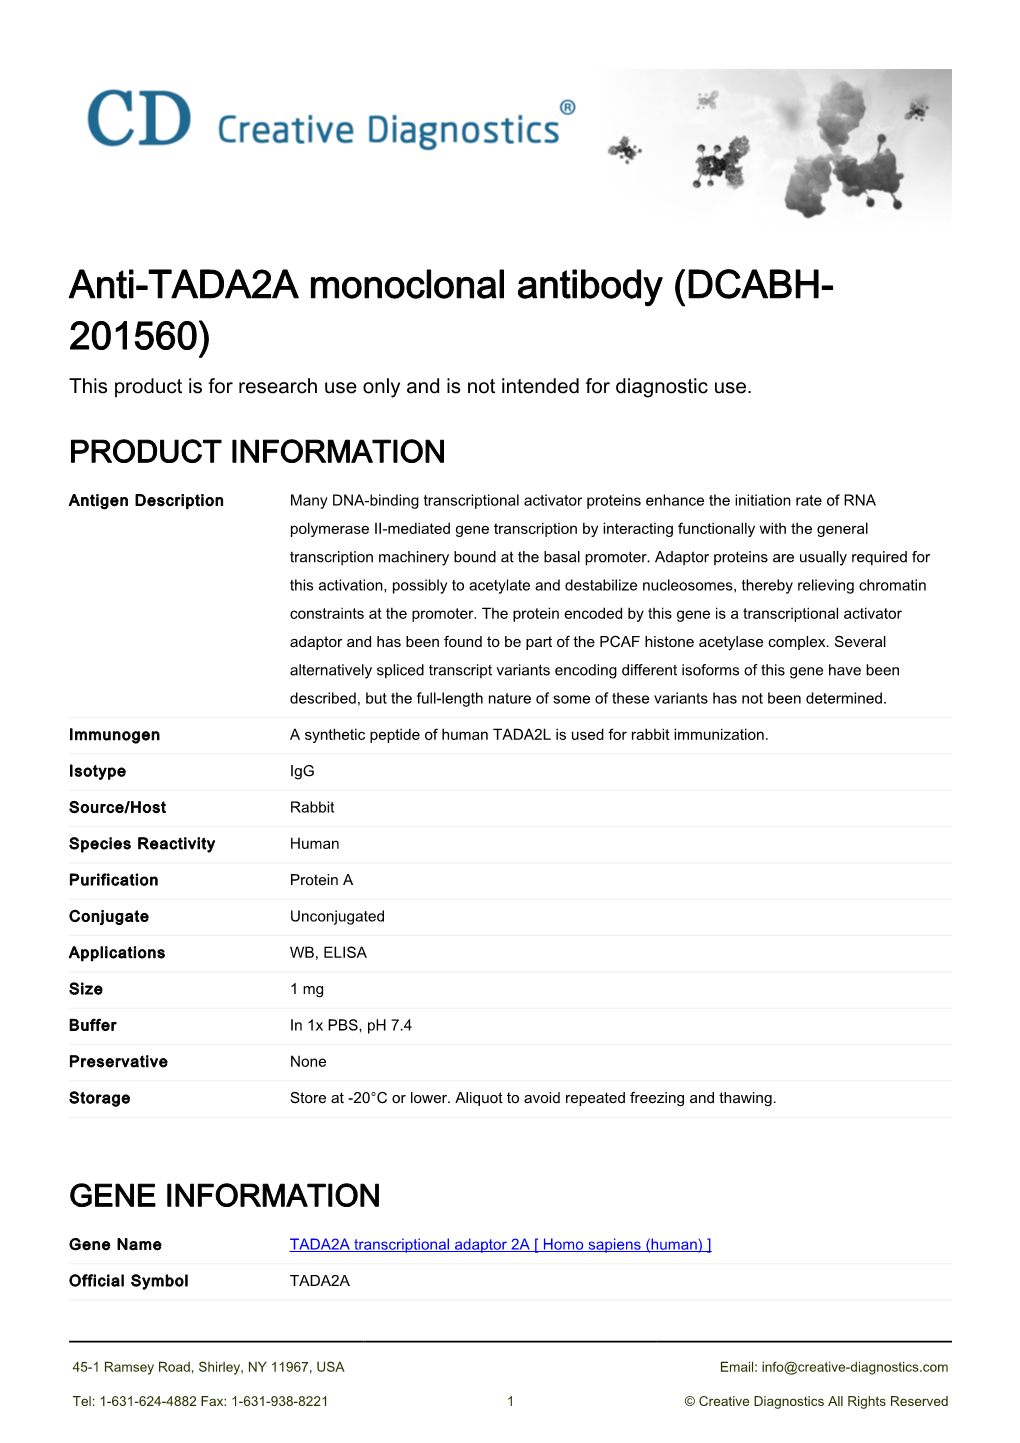 Anti-TADA2A Monoclonal Antibody (DCABH- 201560) This Product Is for Research Use Only and Is Not Intended for Diagnostic Use